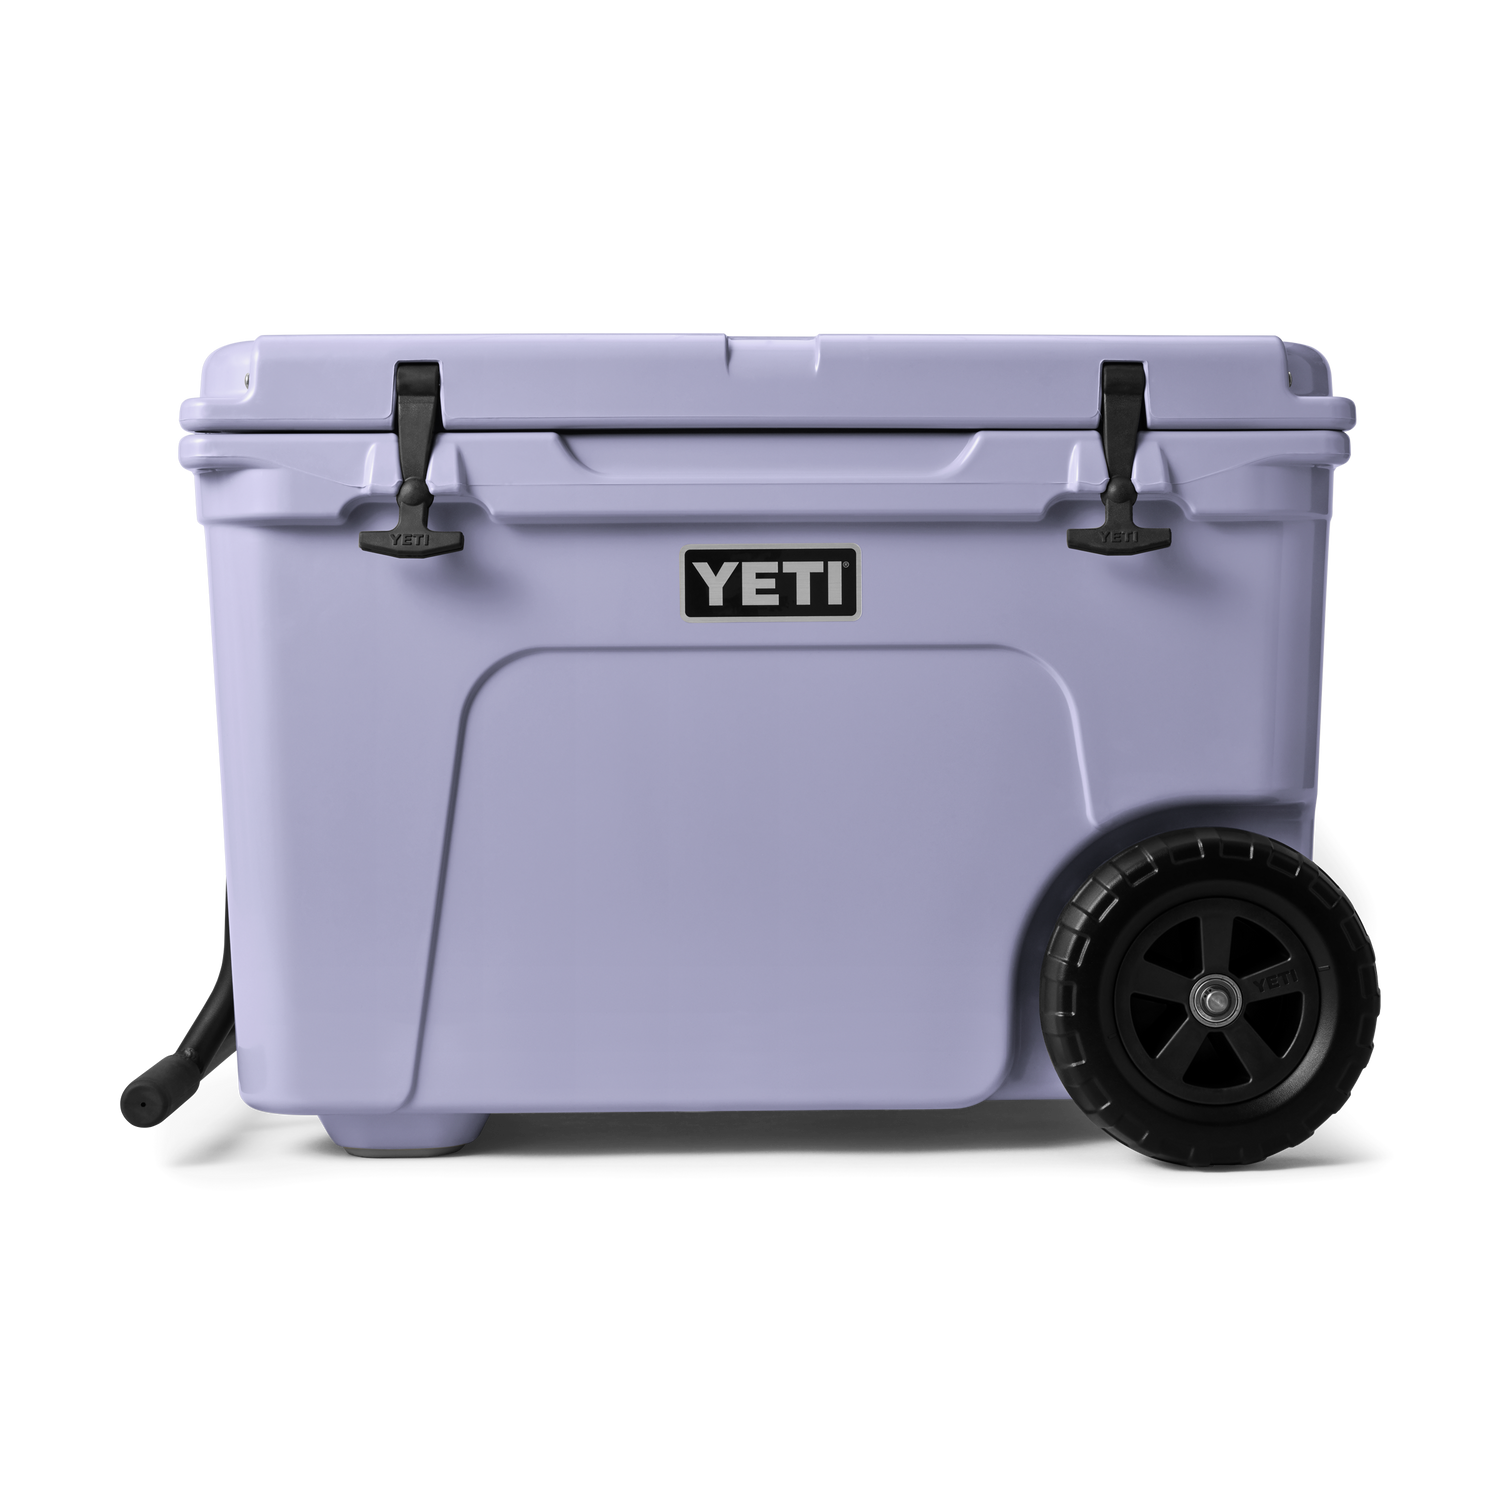 Yeti Tundra Haul Portable Hard Cooler - Coral for sale online